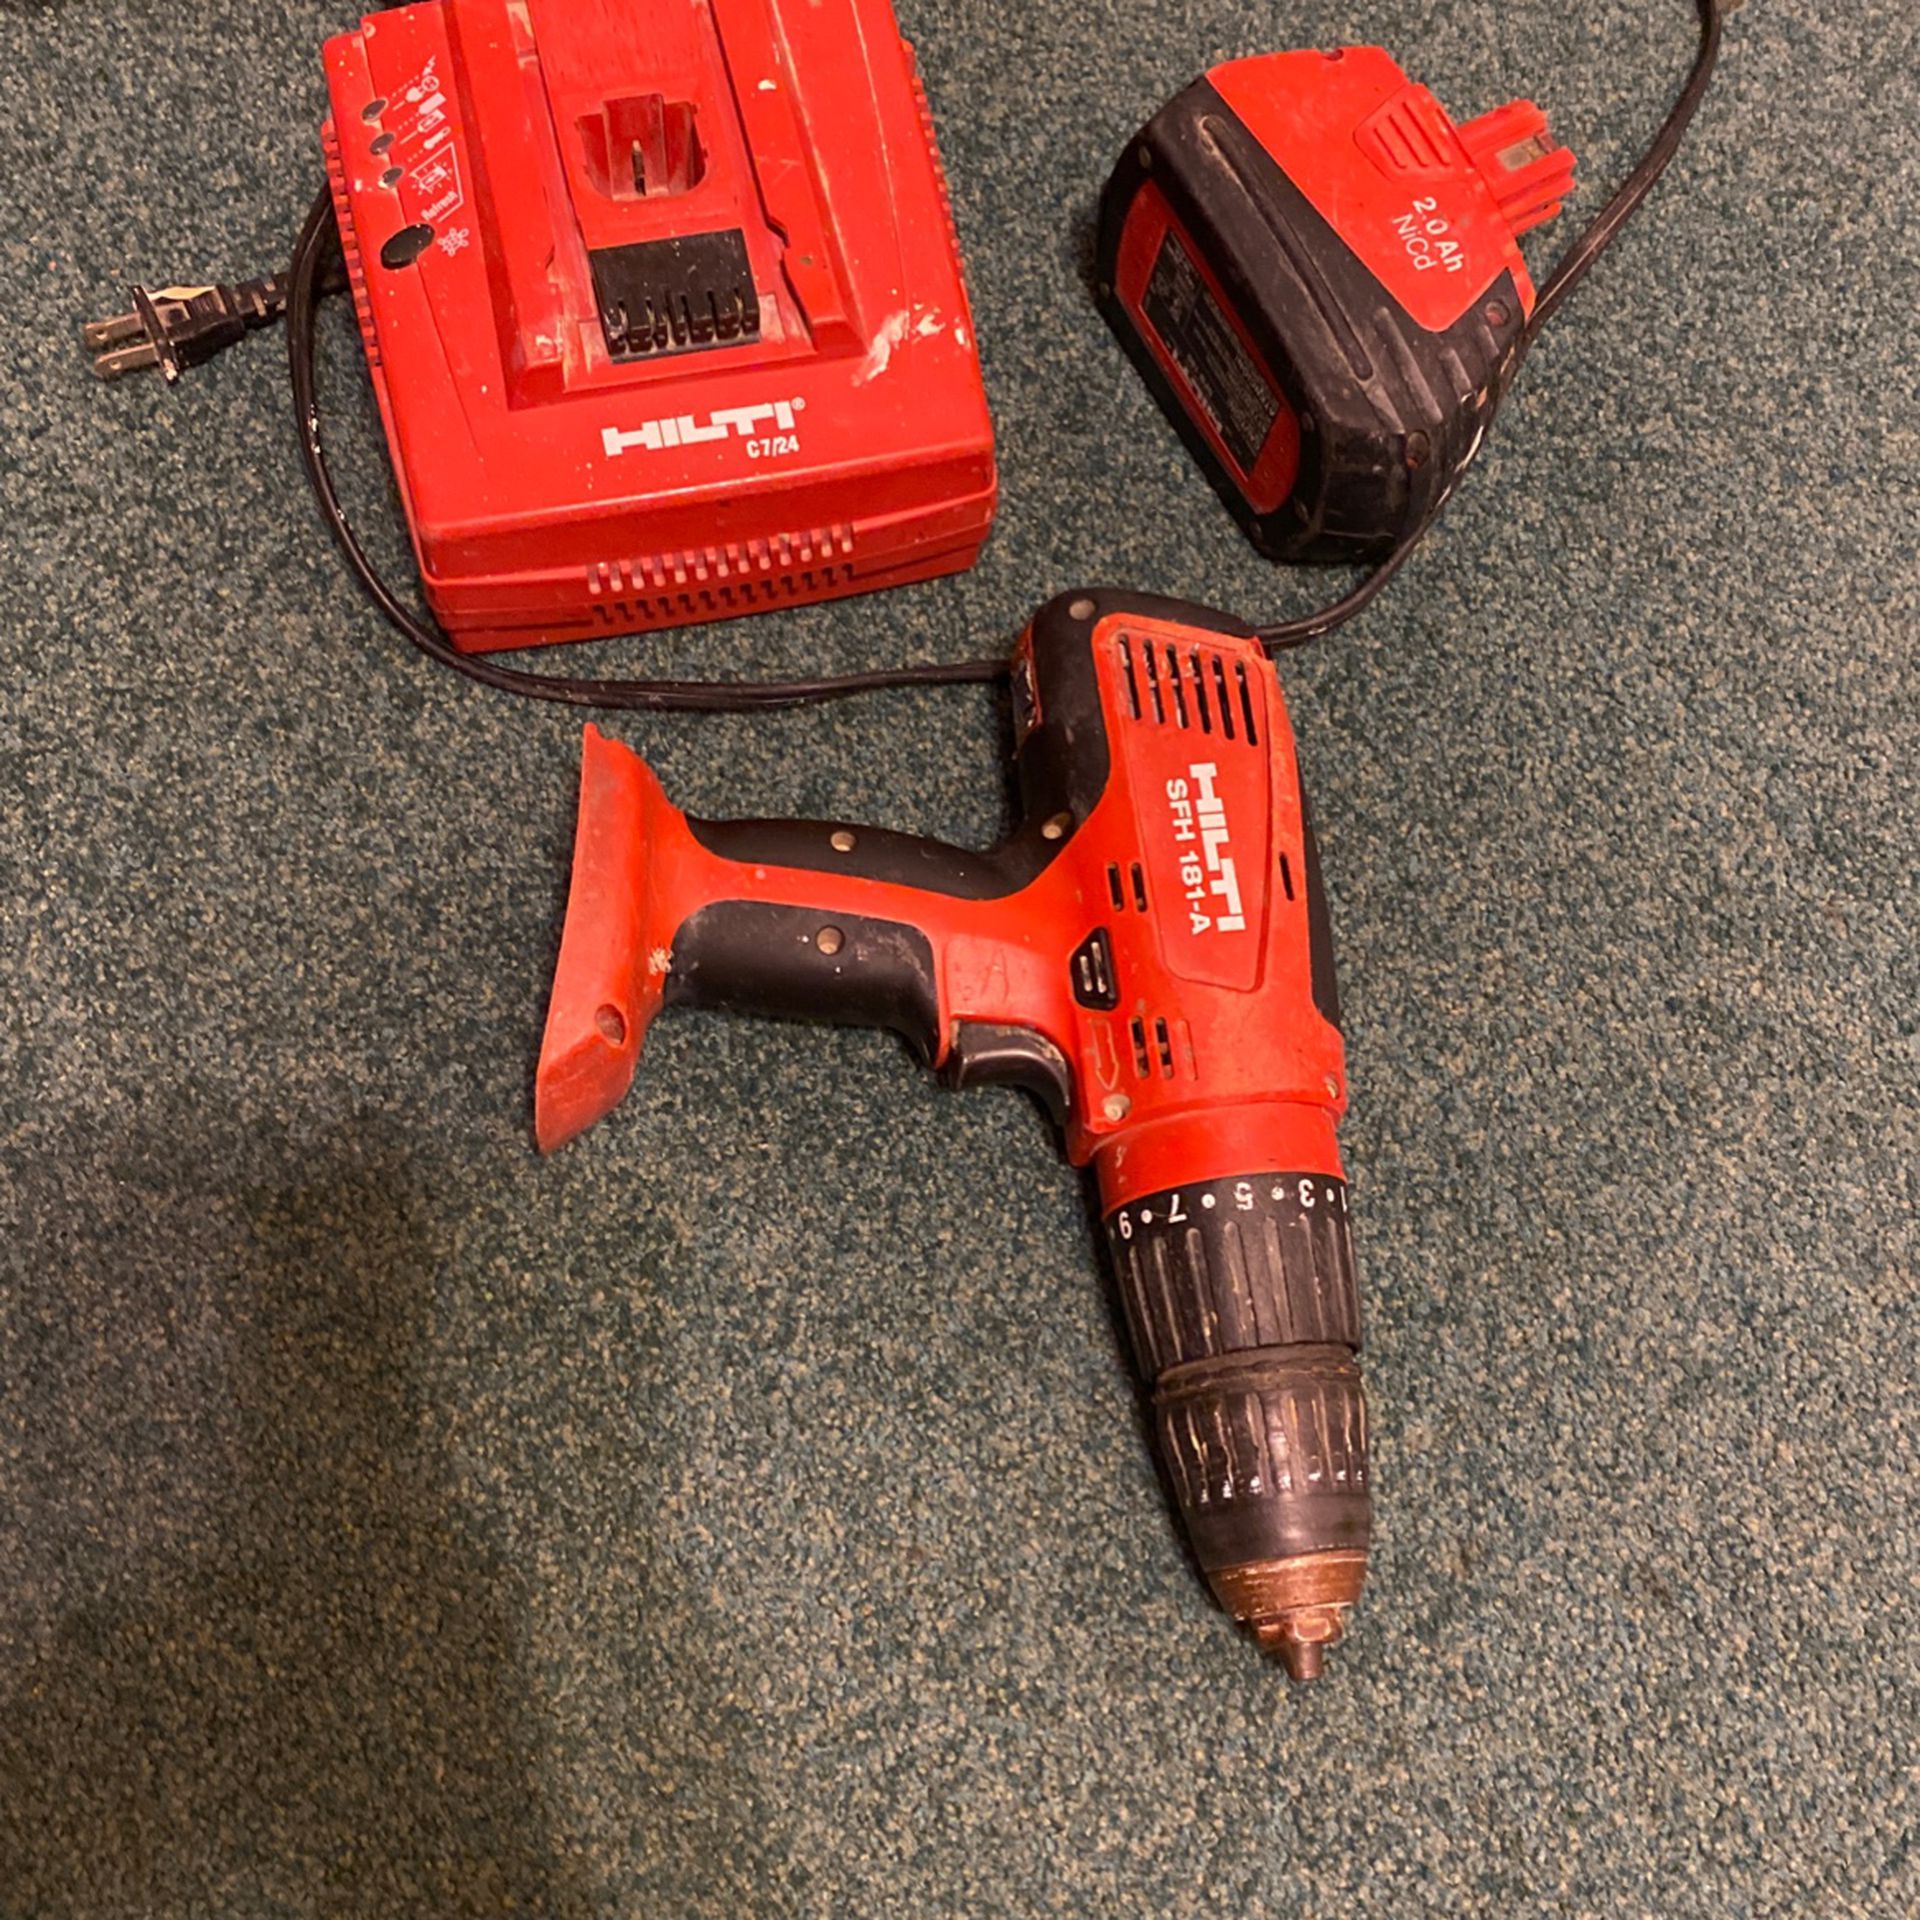 HILTI SFH 181-A hammer drill with Battery and Charger